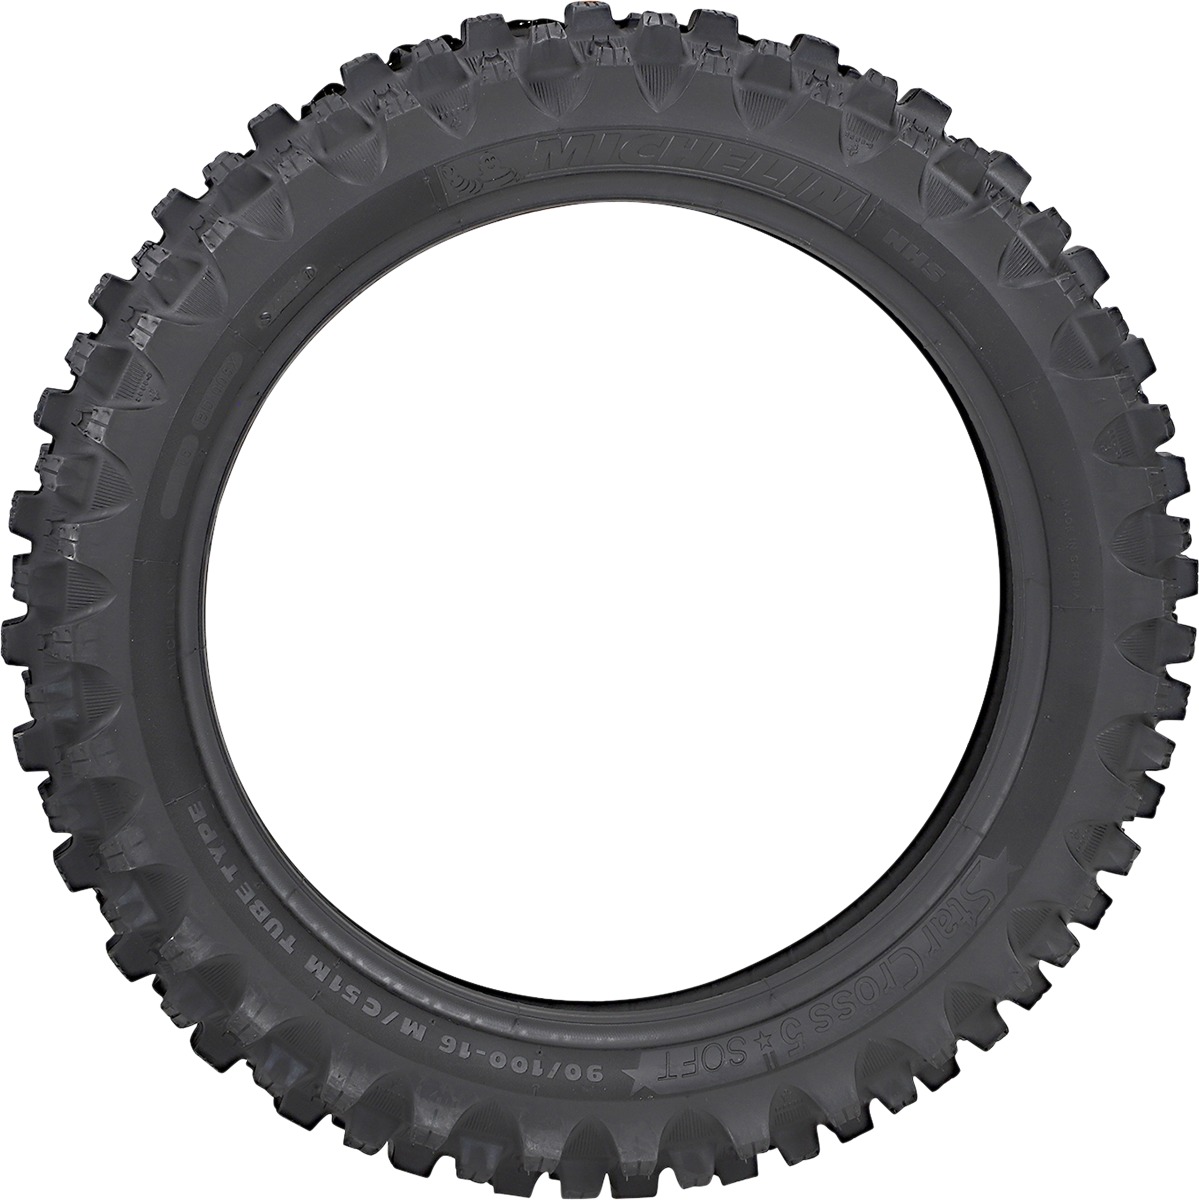 90/100-14 StarCross 5 Soft Rear Motorcycle Tire - TT - Click Image to Close